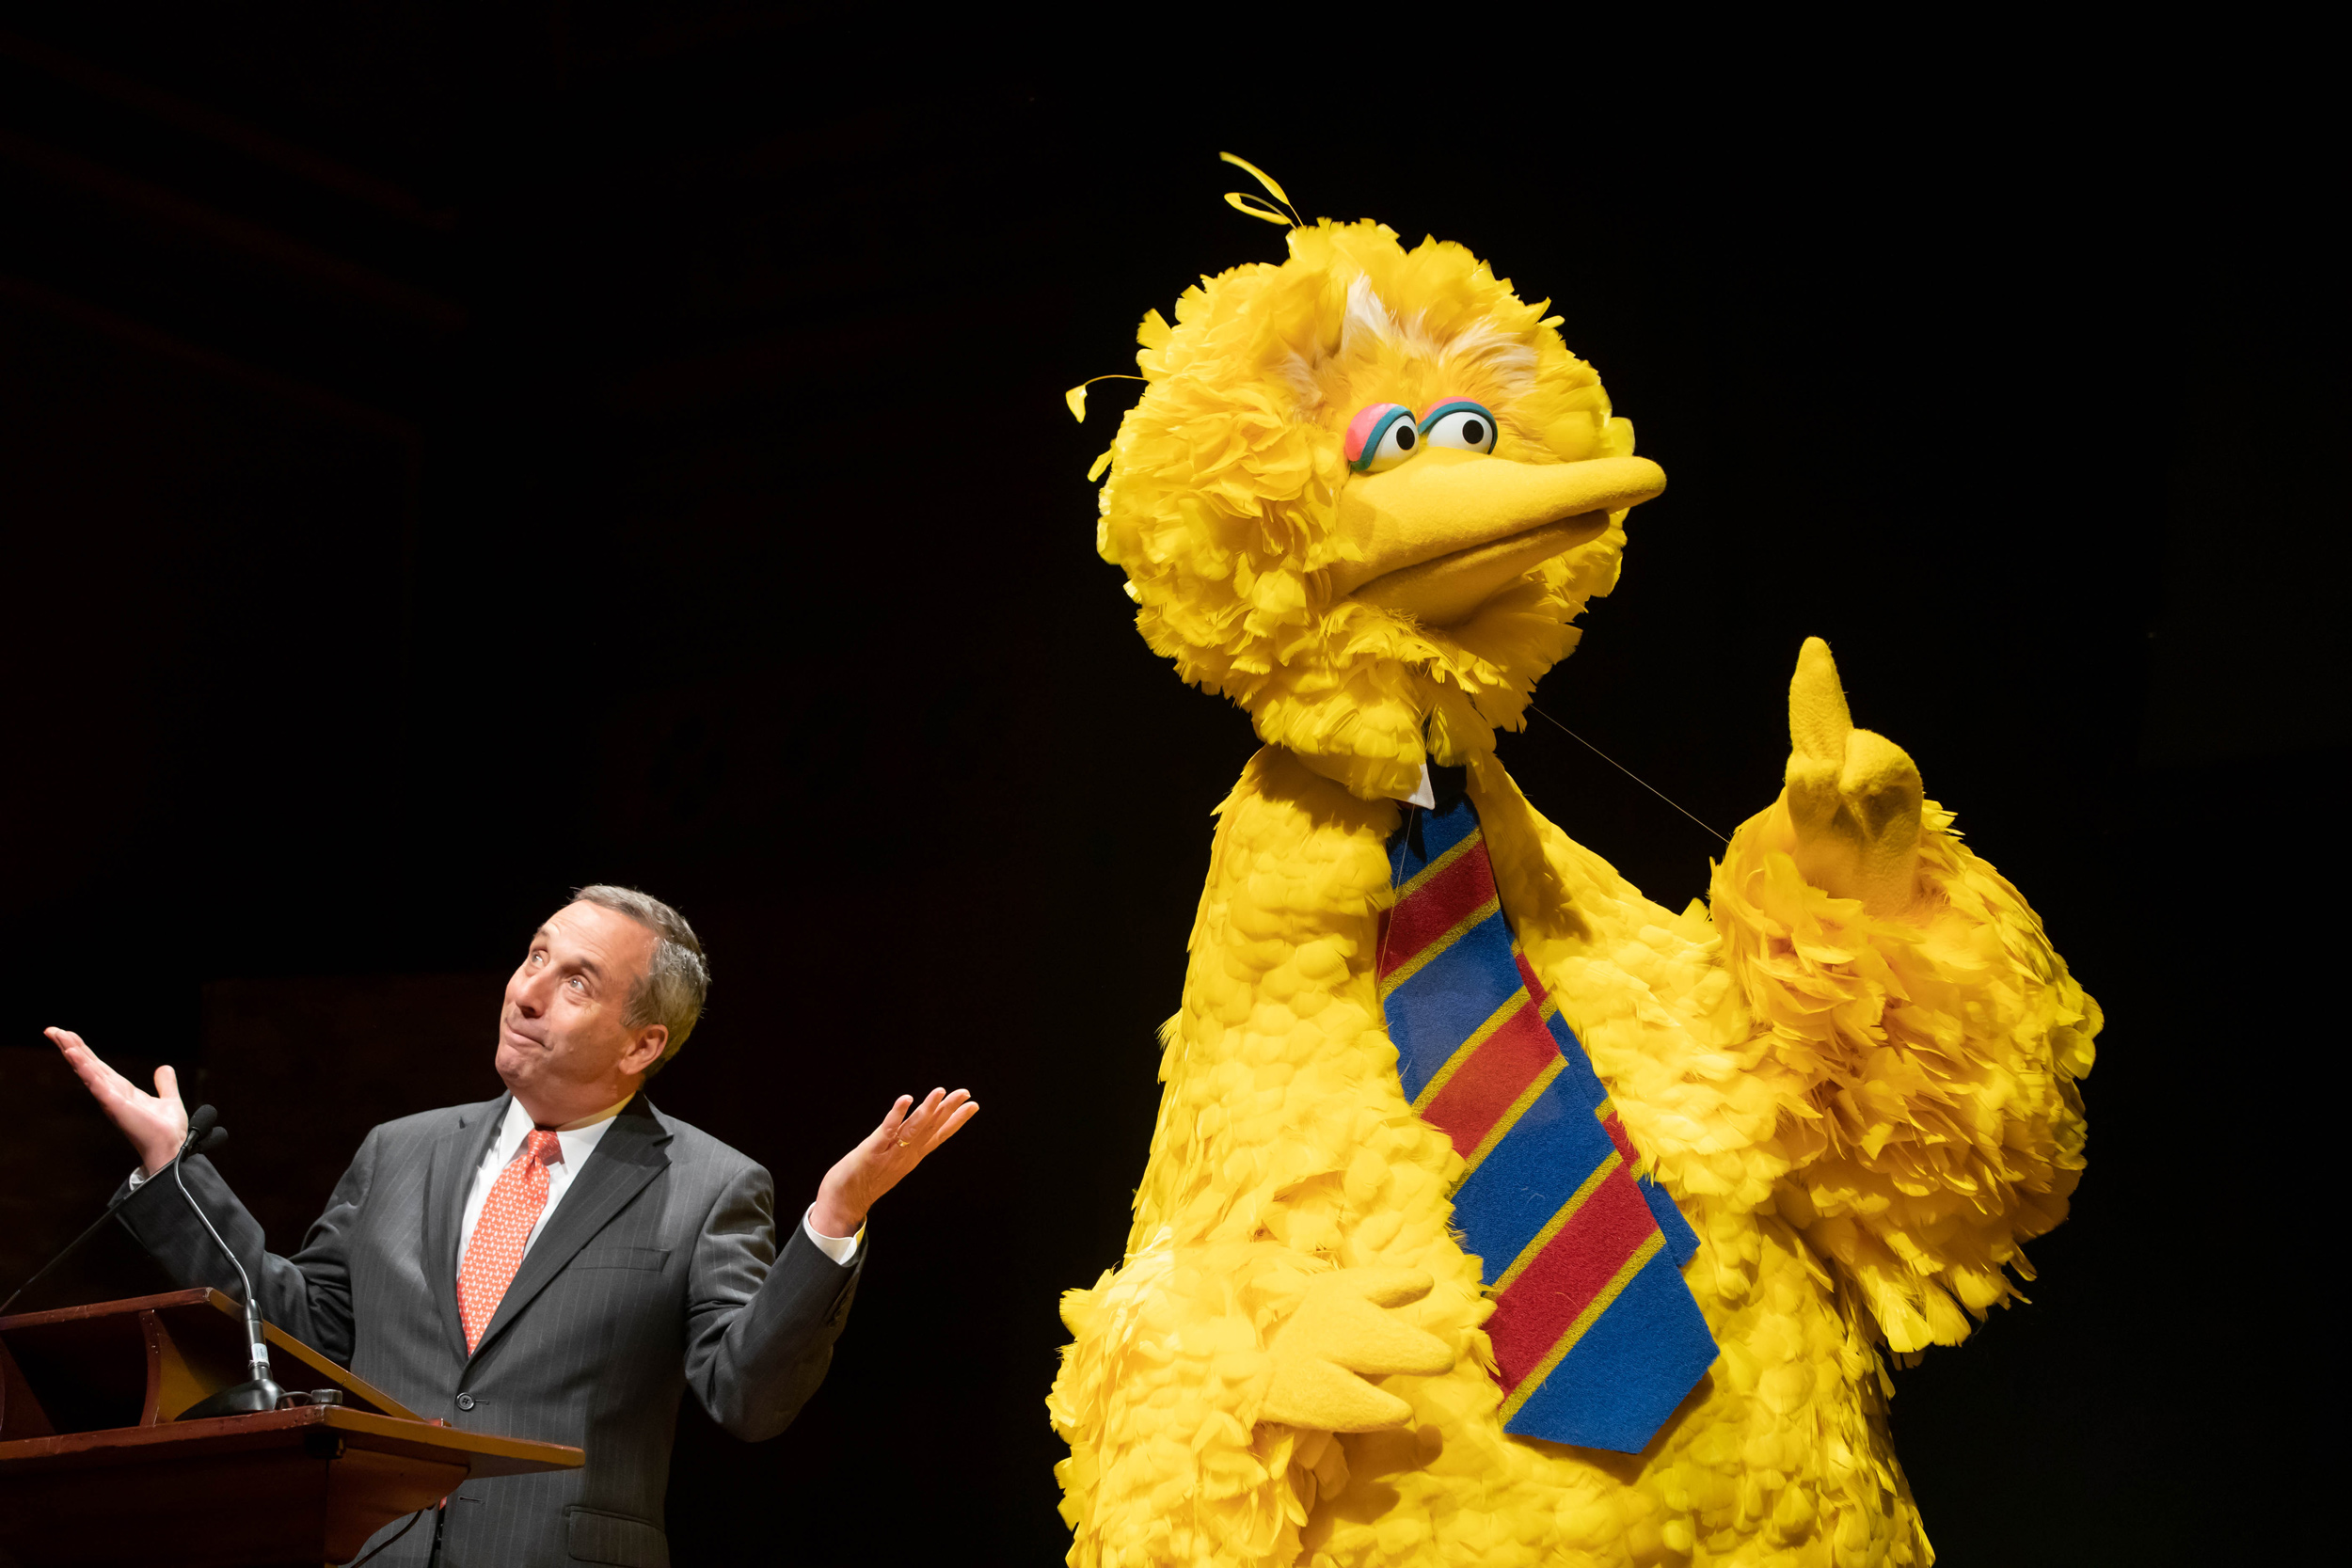 Big Bird and Bacow shared the stage at an October 2019 event marking the 50-year anniversary of Sesame Street and the Harvard partnership that helped create it.